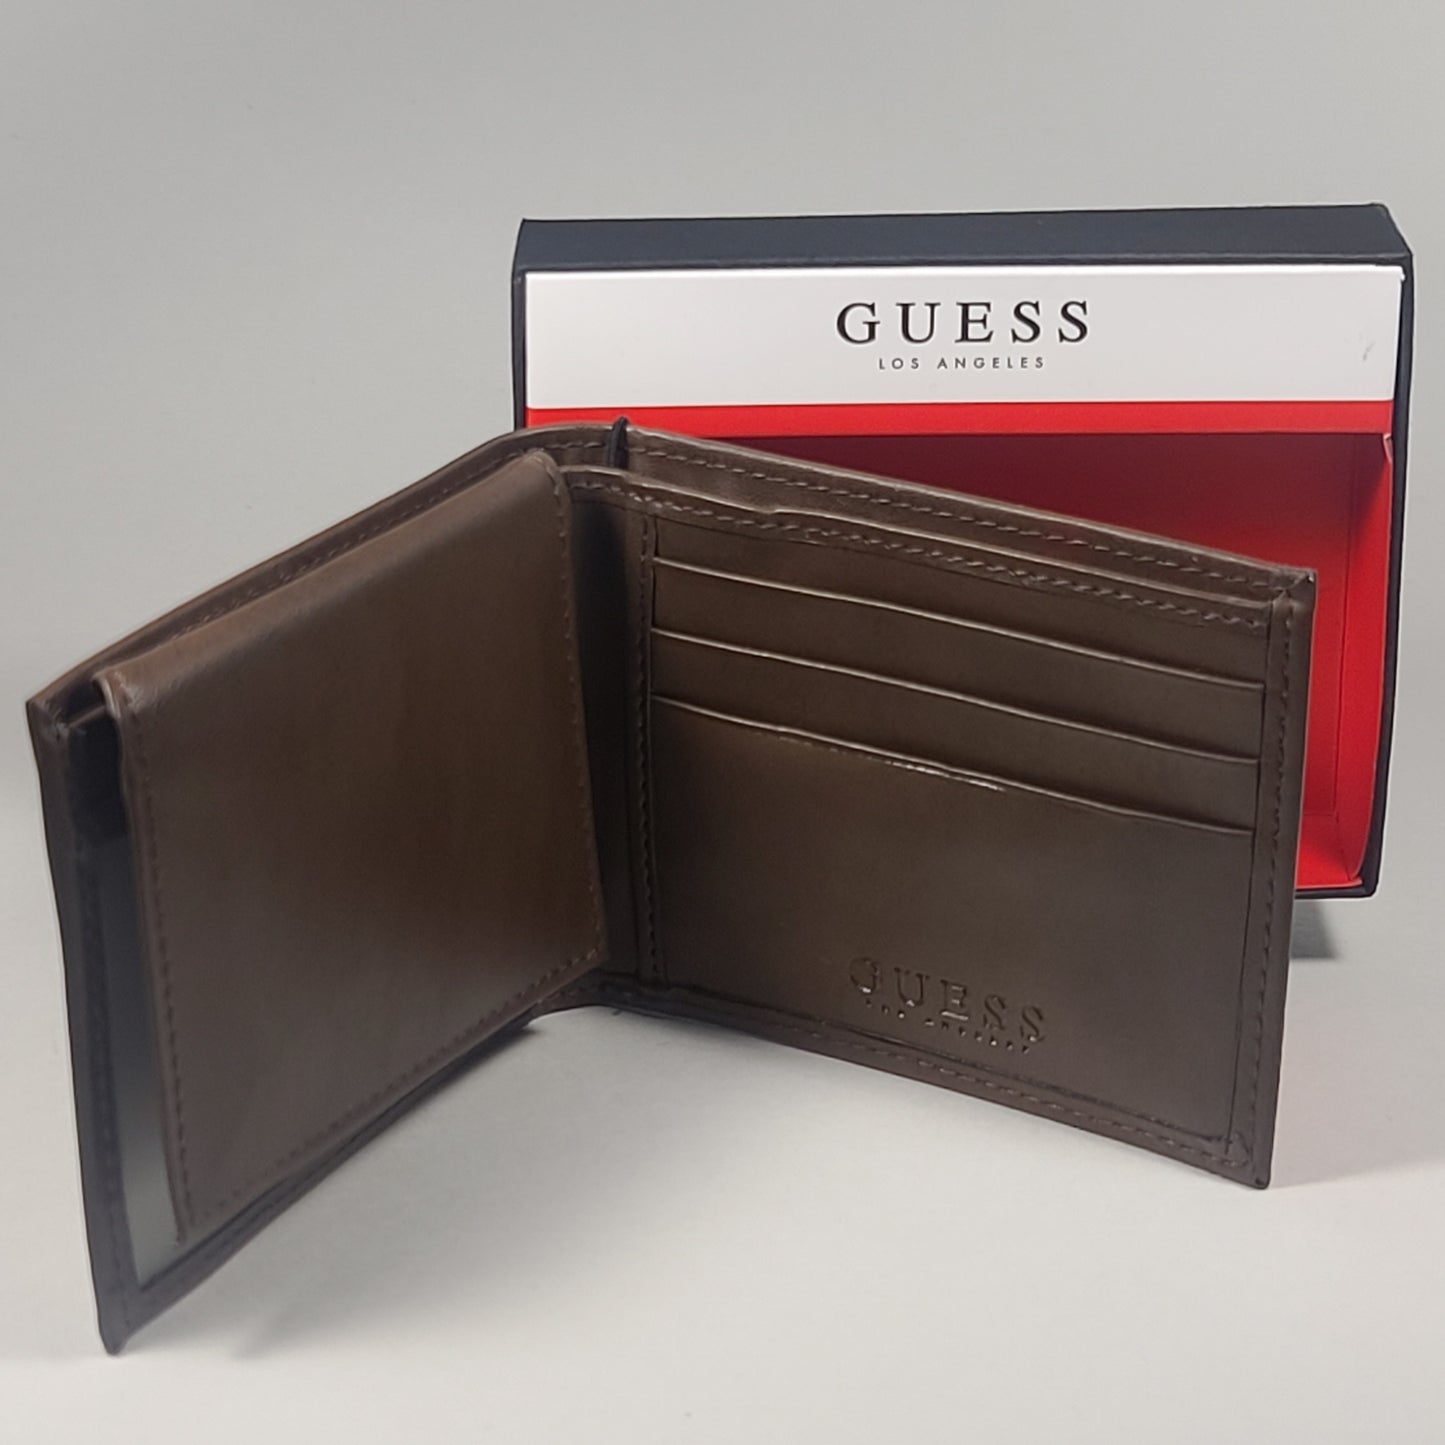 Guess Los Angeles Men’s Bifold Ebossed Brown Leather Wallet Passcase 31GO220112 - Wallets